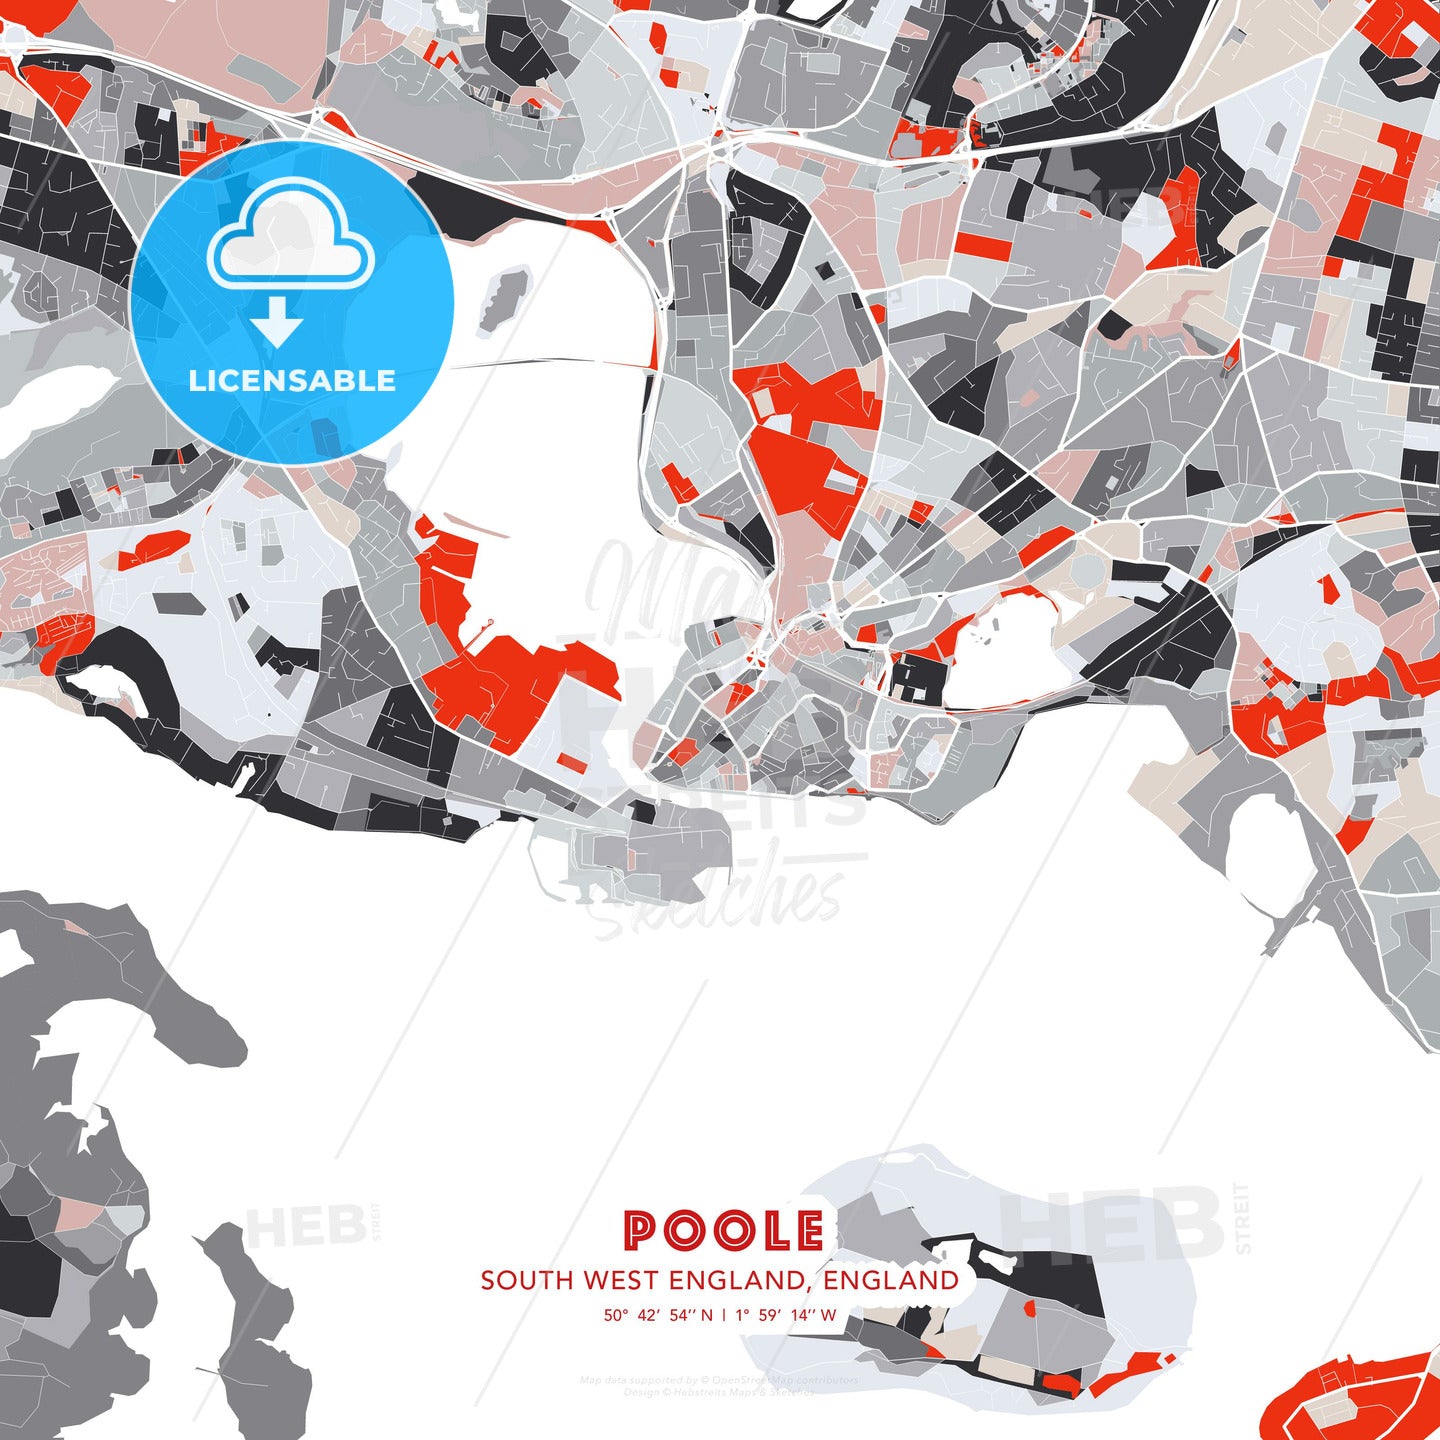 Poole, South West England, England, modern map - HEBSTREITS Sketches